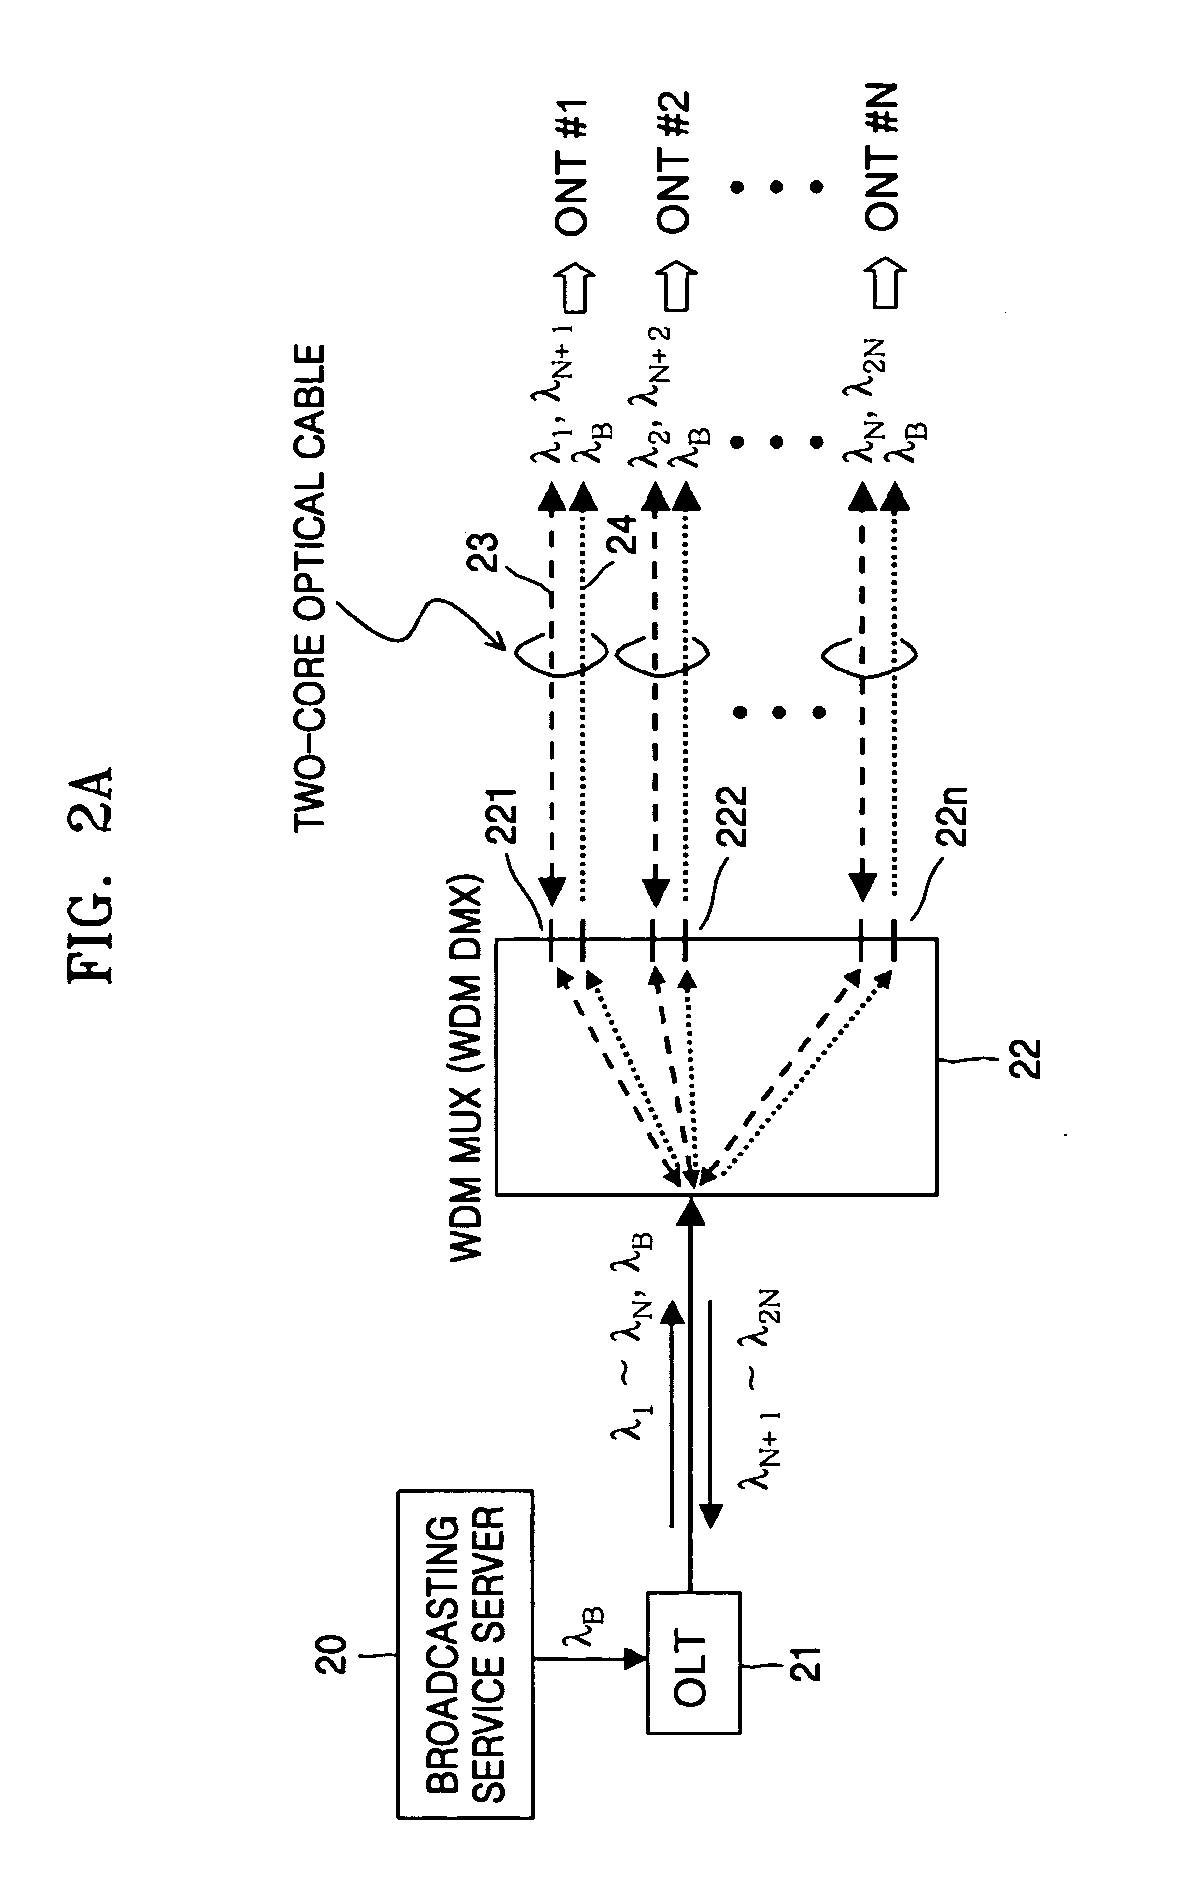 Apparatus for providing broadcasting service through overlay structure in WDM-PON